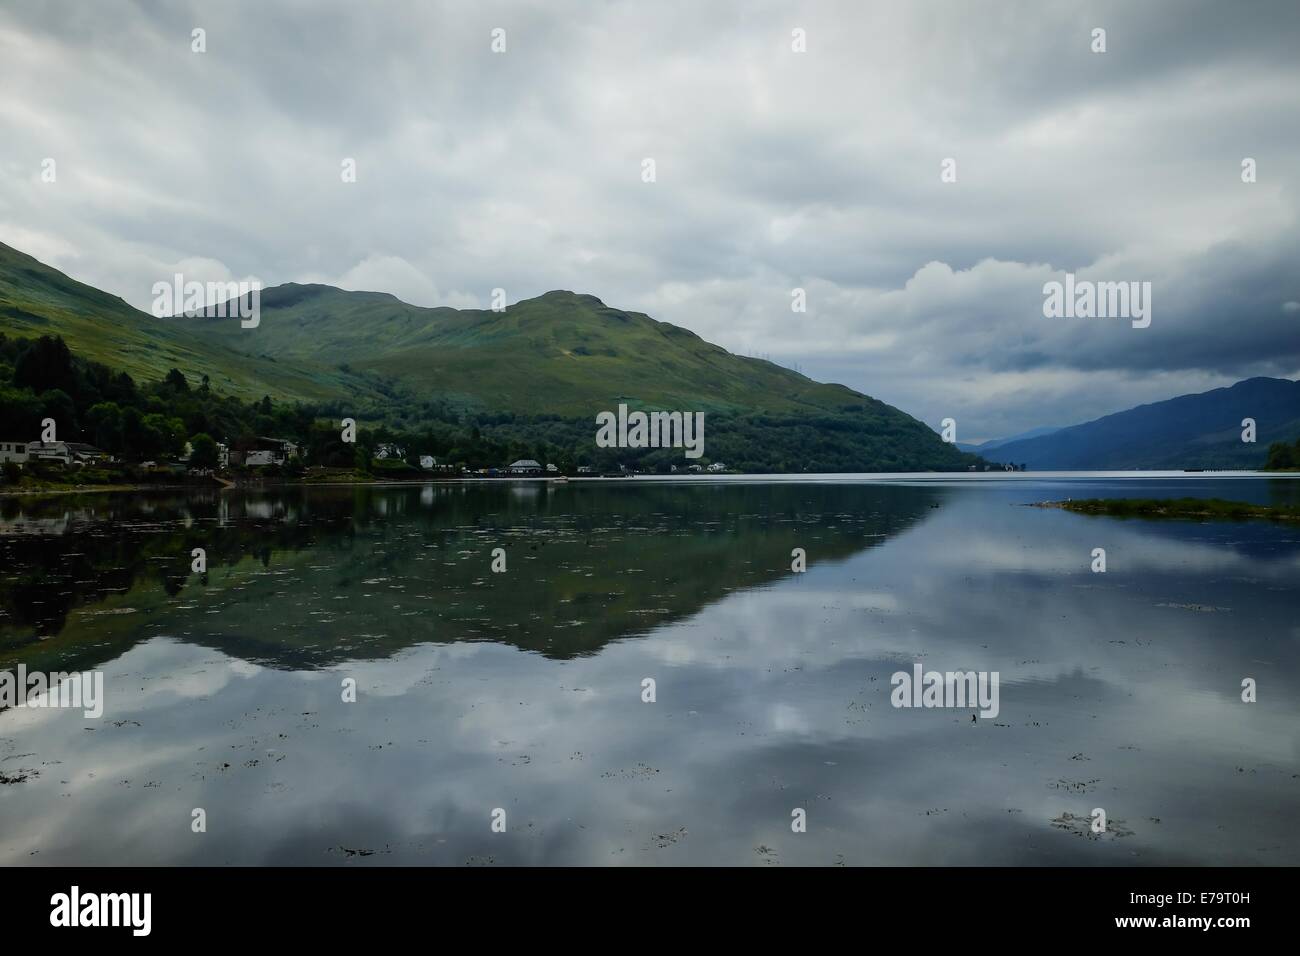 Loch reflection - Hills and clouds reflected in a Scottish loch Stock Photo